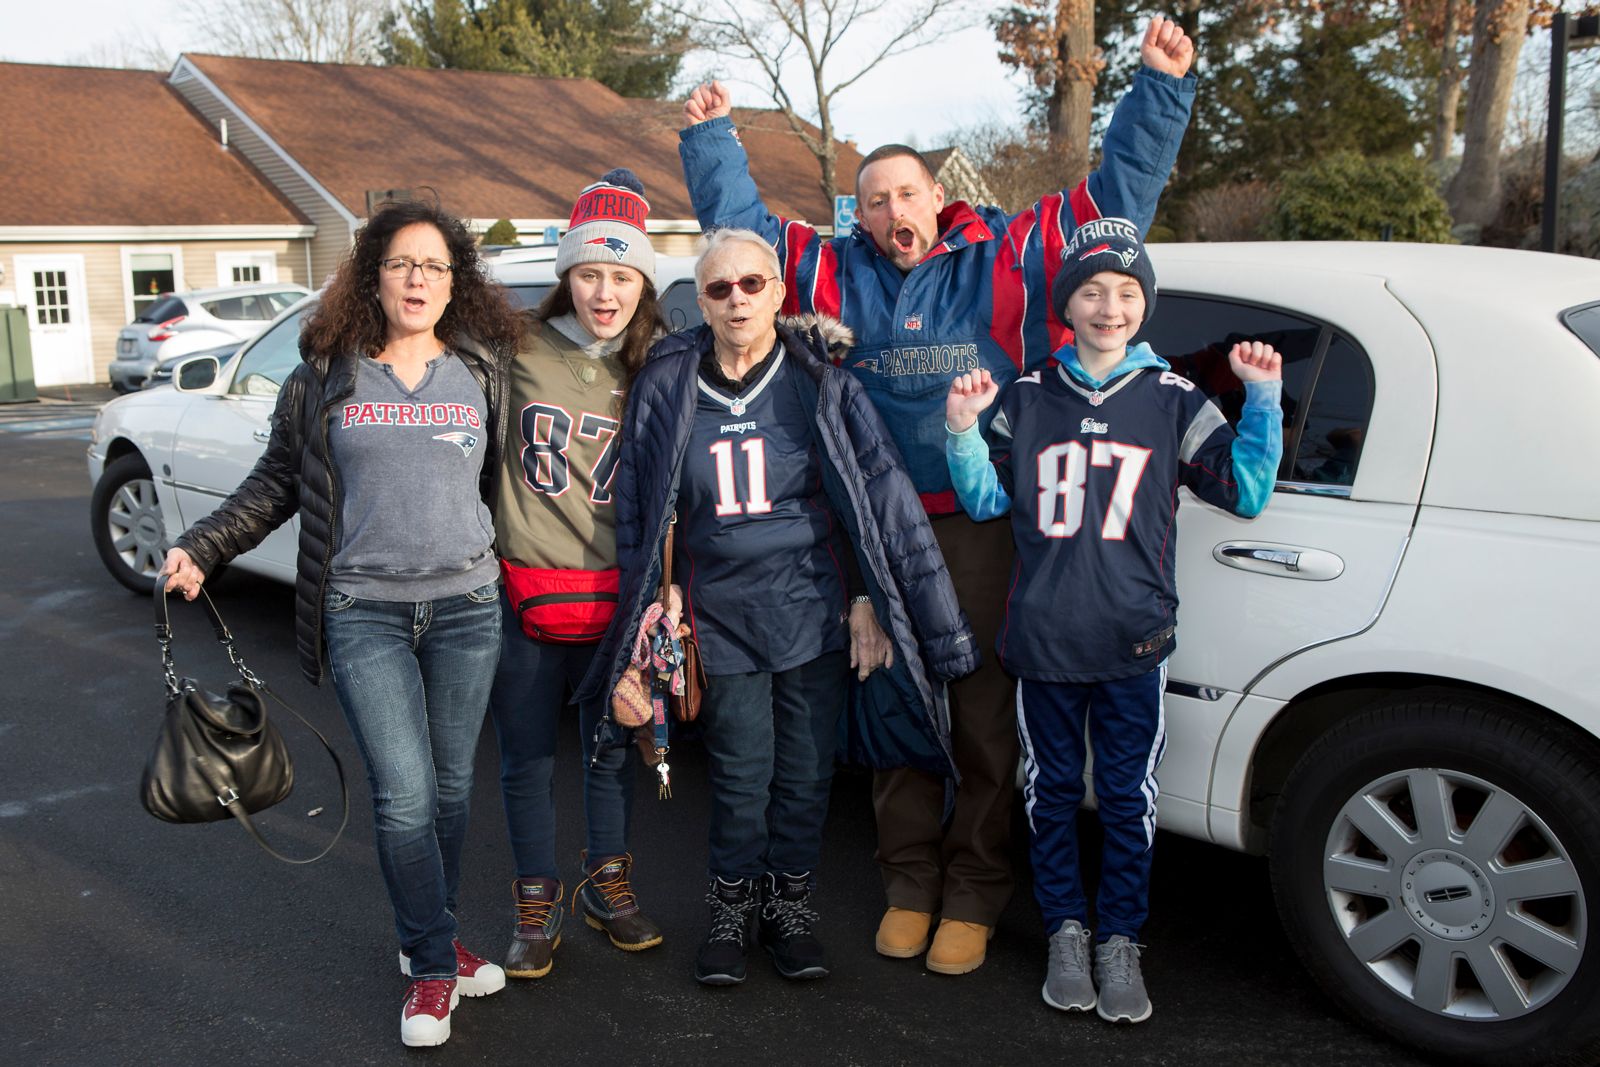 Joan McLynch with her family as they prepare to leave for the New England Patriots game at Gillette Stadium